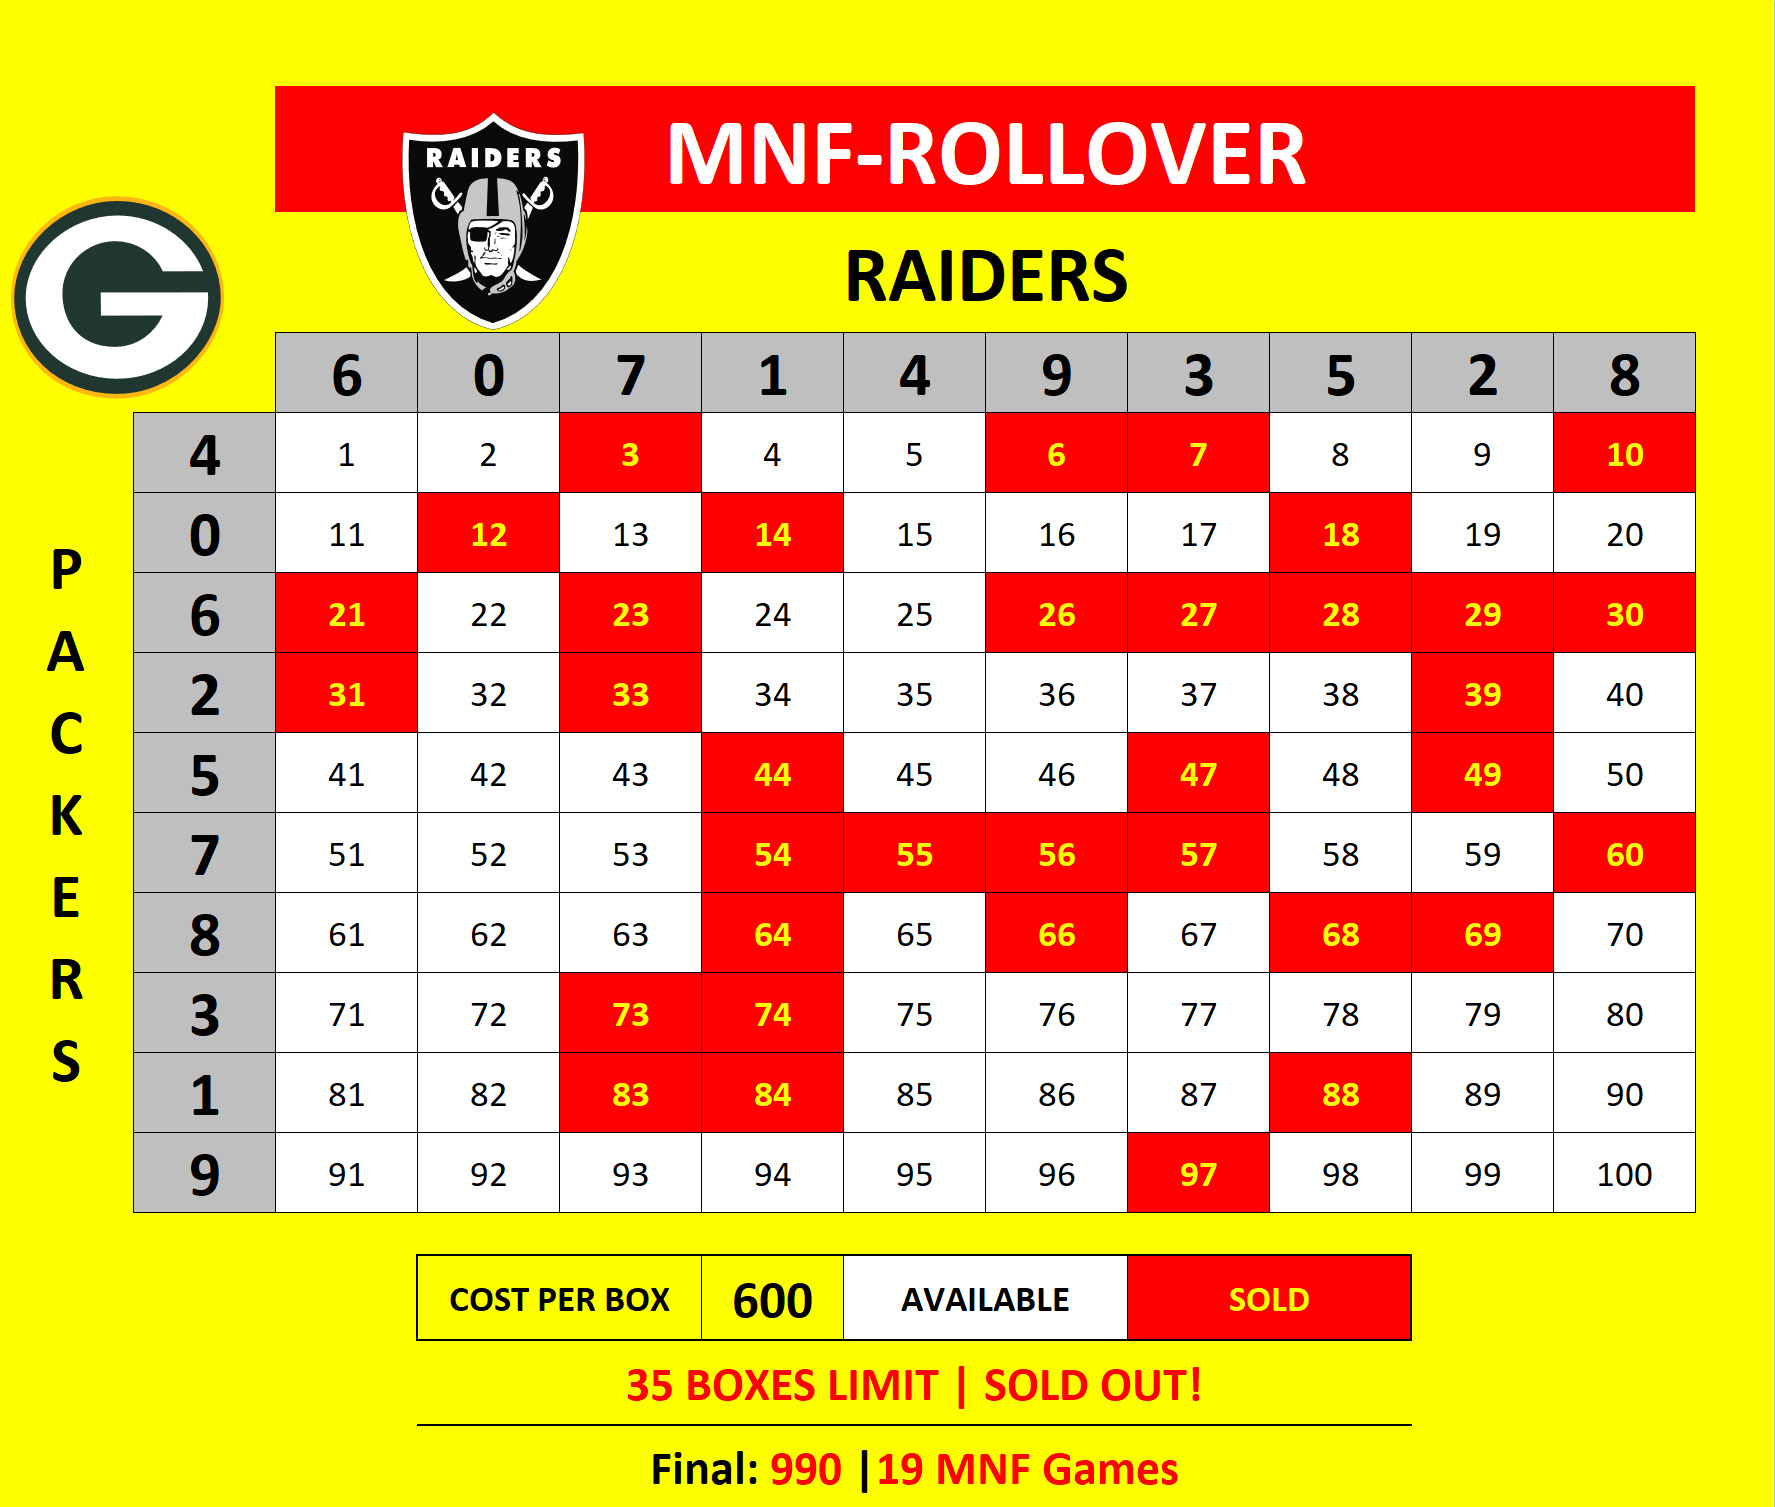 MNF-Rollover-B Packers at Raiders